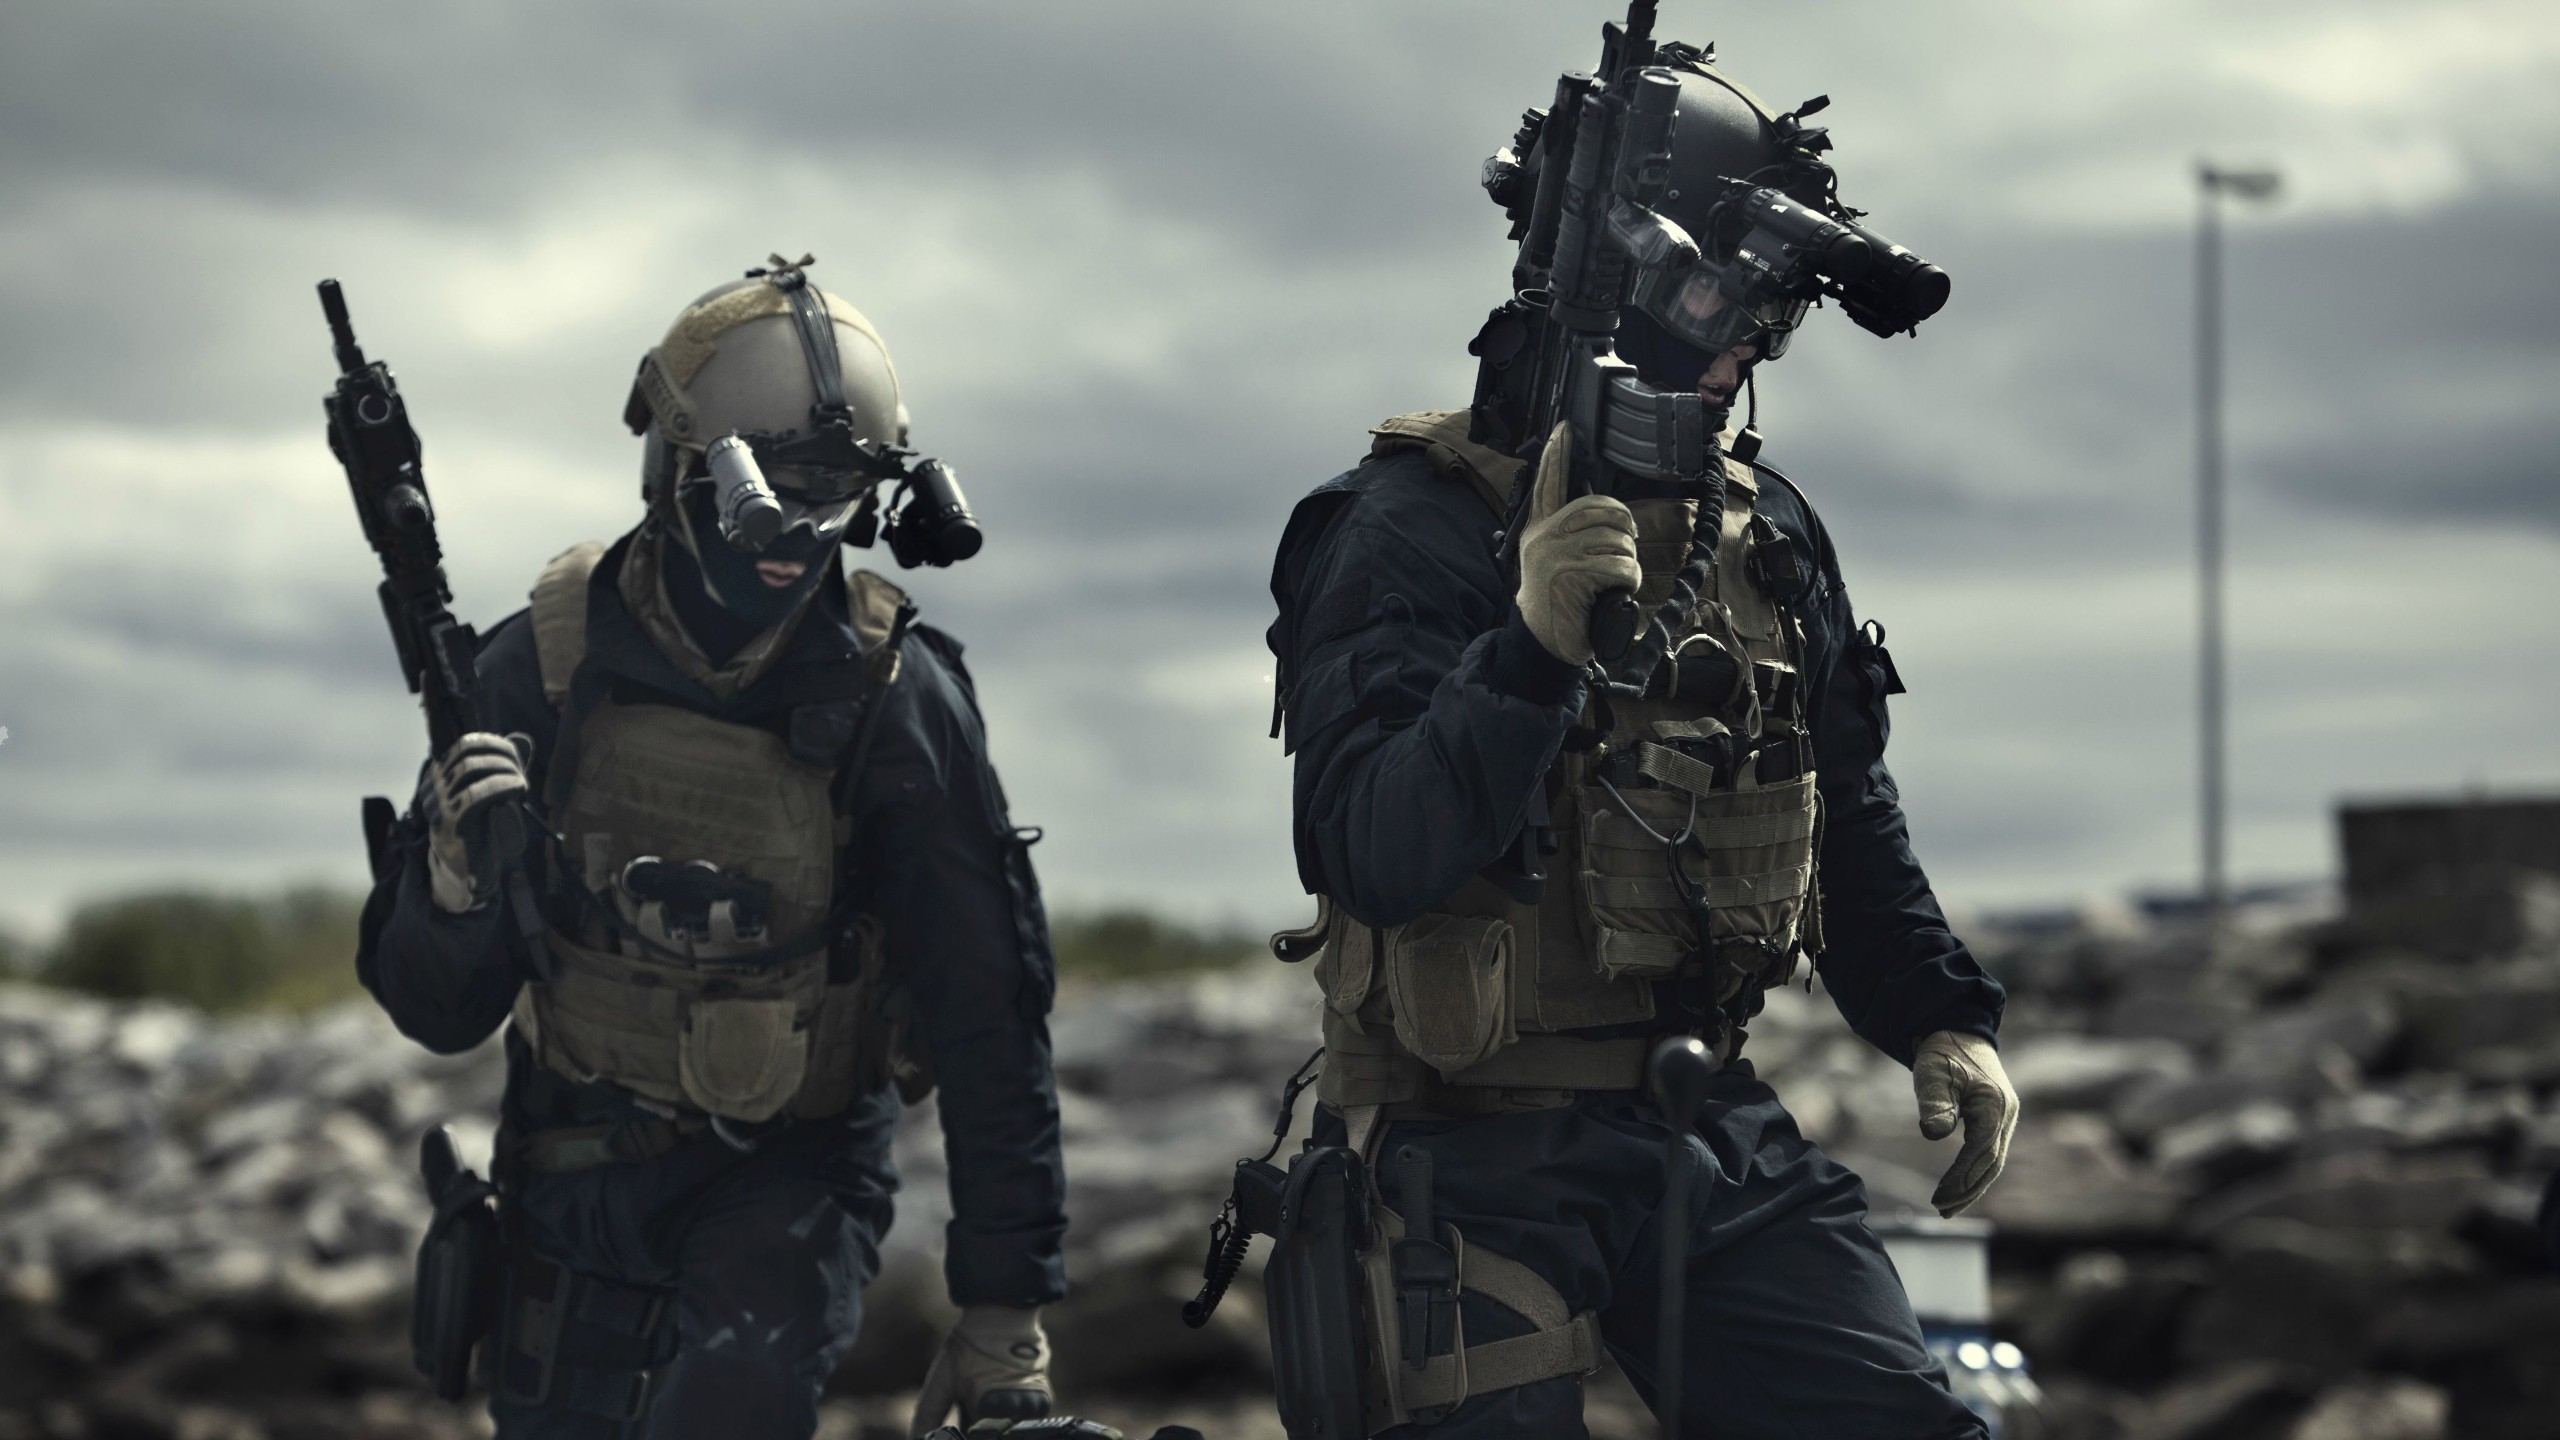 Wallpaper, special forces, soldier, Norway, military, army, Person, assault rifle, tactical, Marksman, Norwegian Army, air force, screenshot, mercenary, reconnaissance, infantry, troop, militia 2560x1440